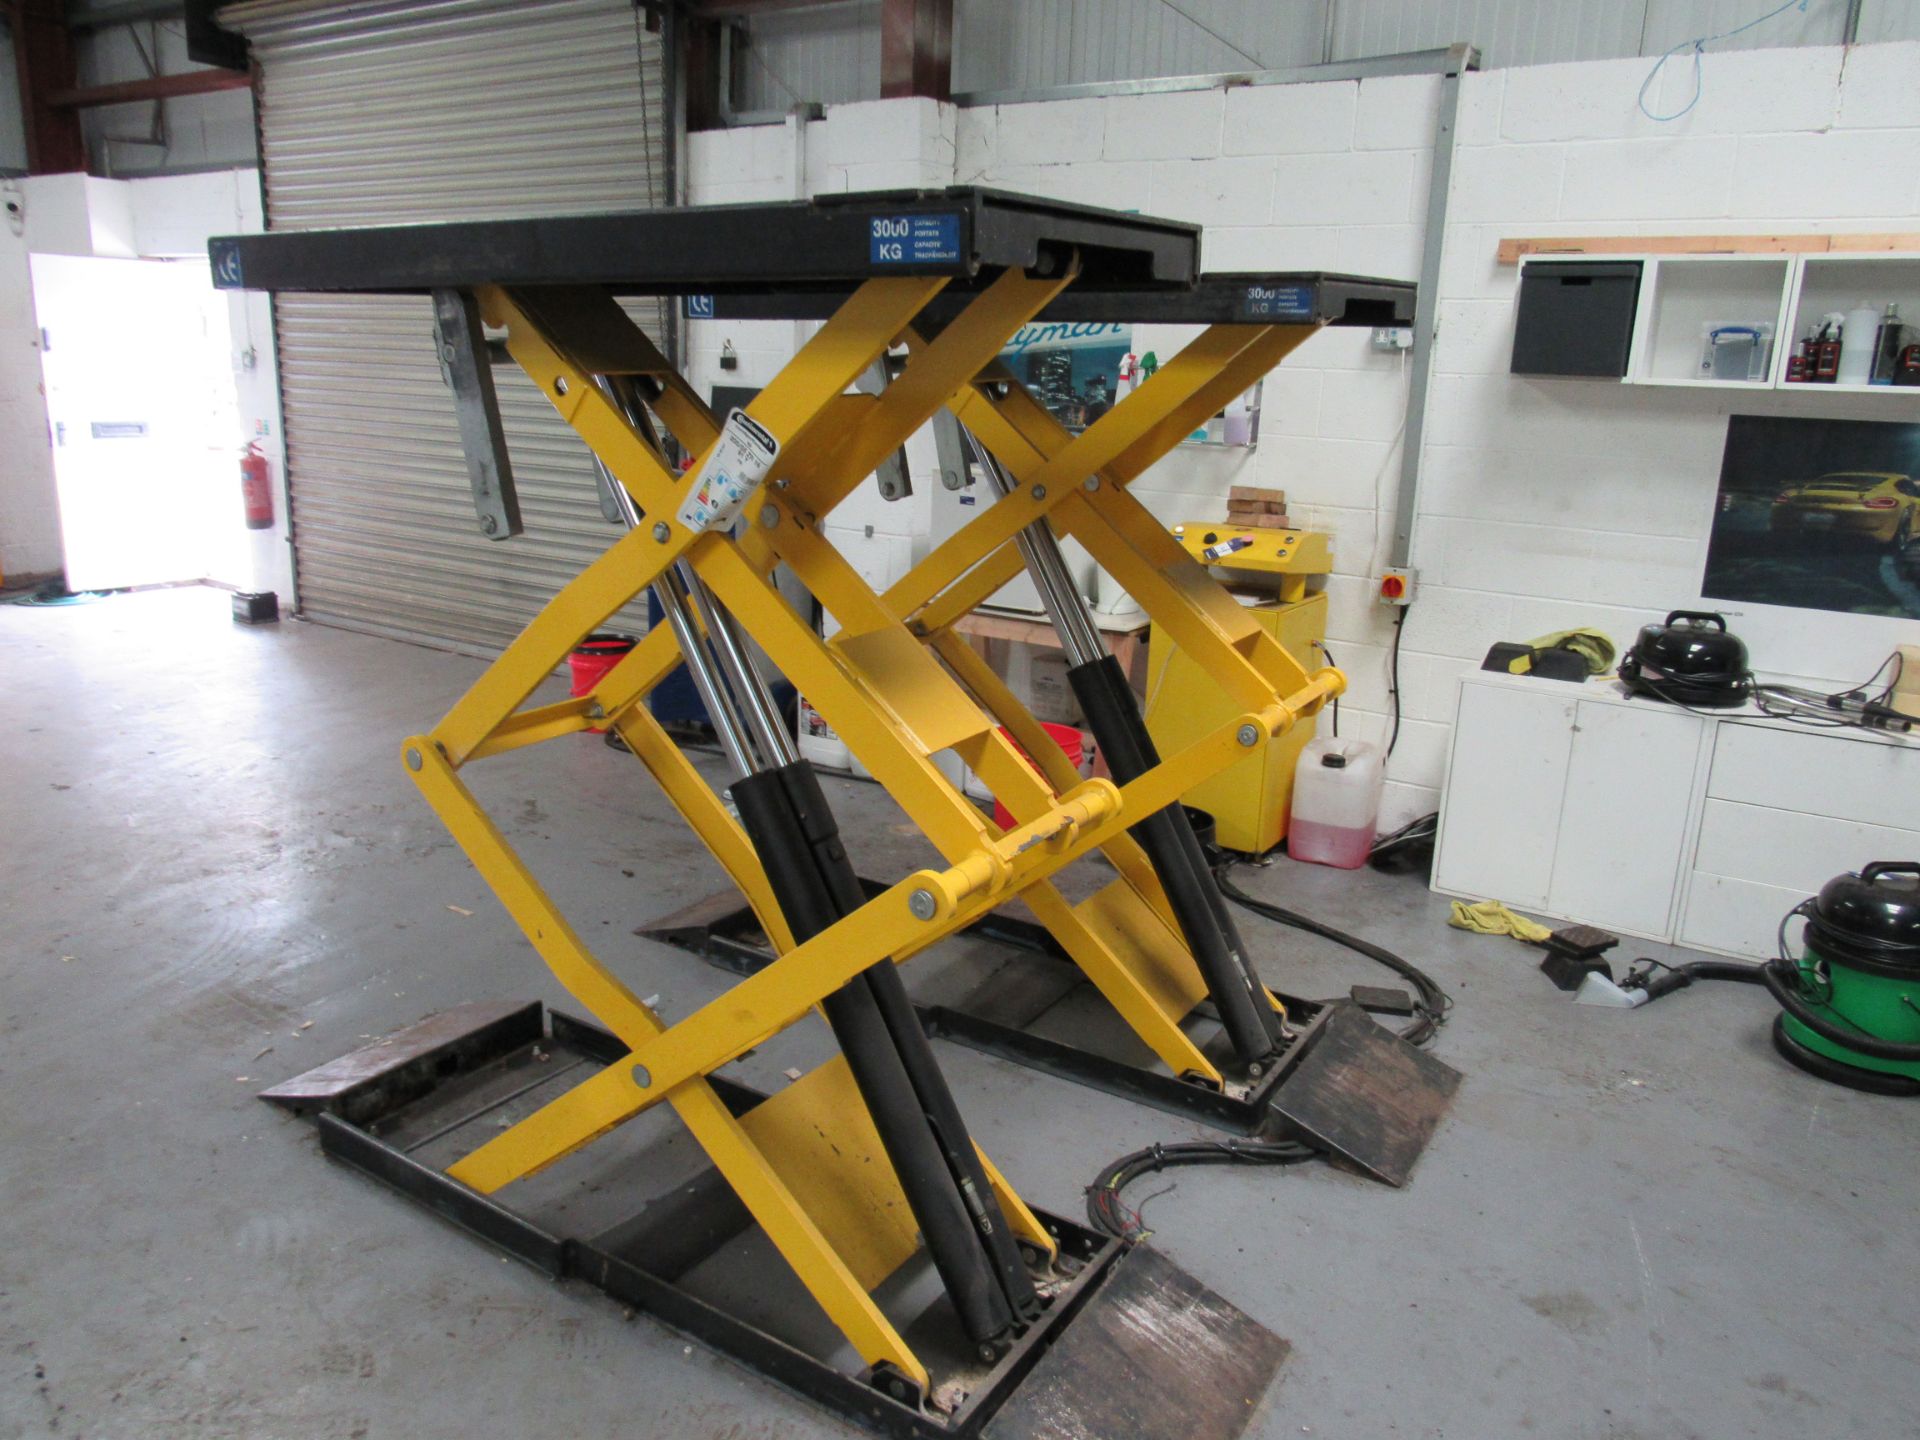 Rotary Porsche 3000kg Hydraulic Scissor Lift, Serial Number 5405274 (Located at Unit 11) - Image 4 of 5